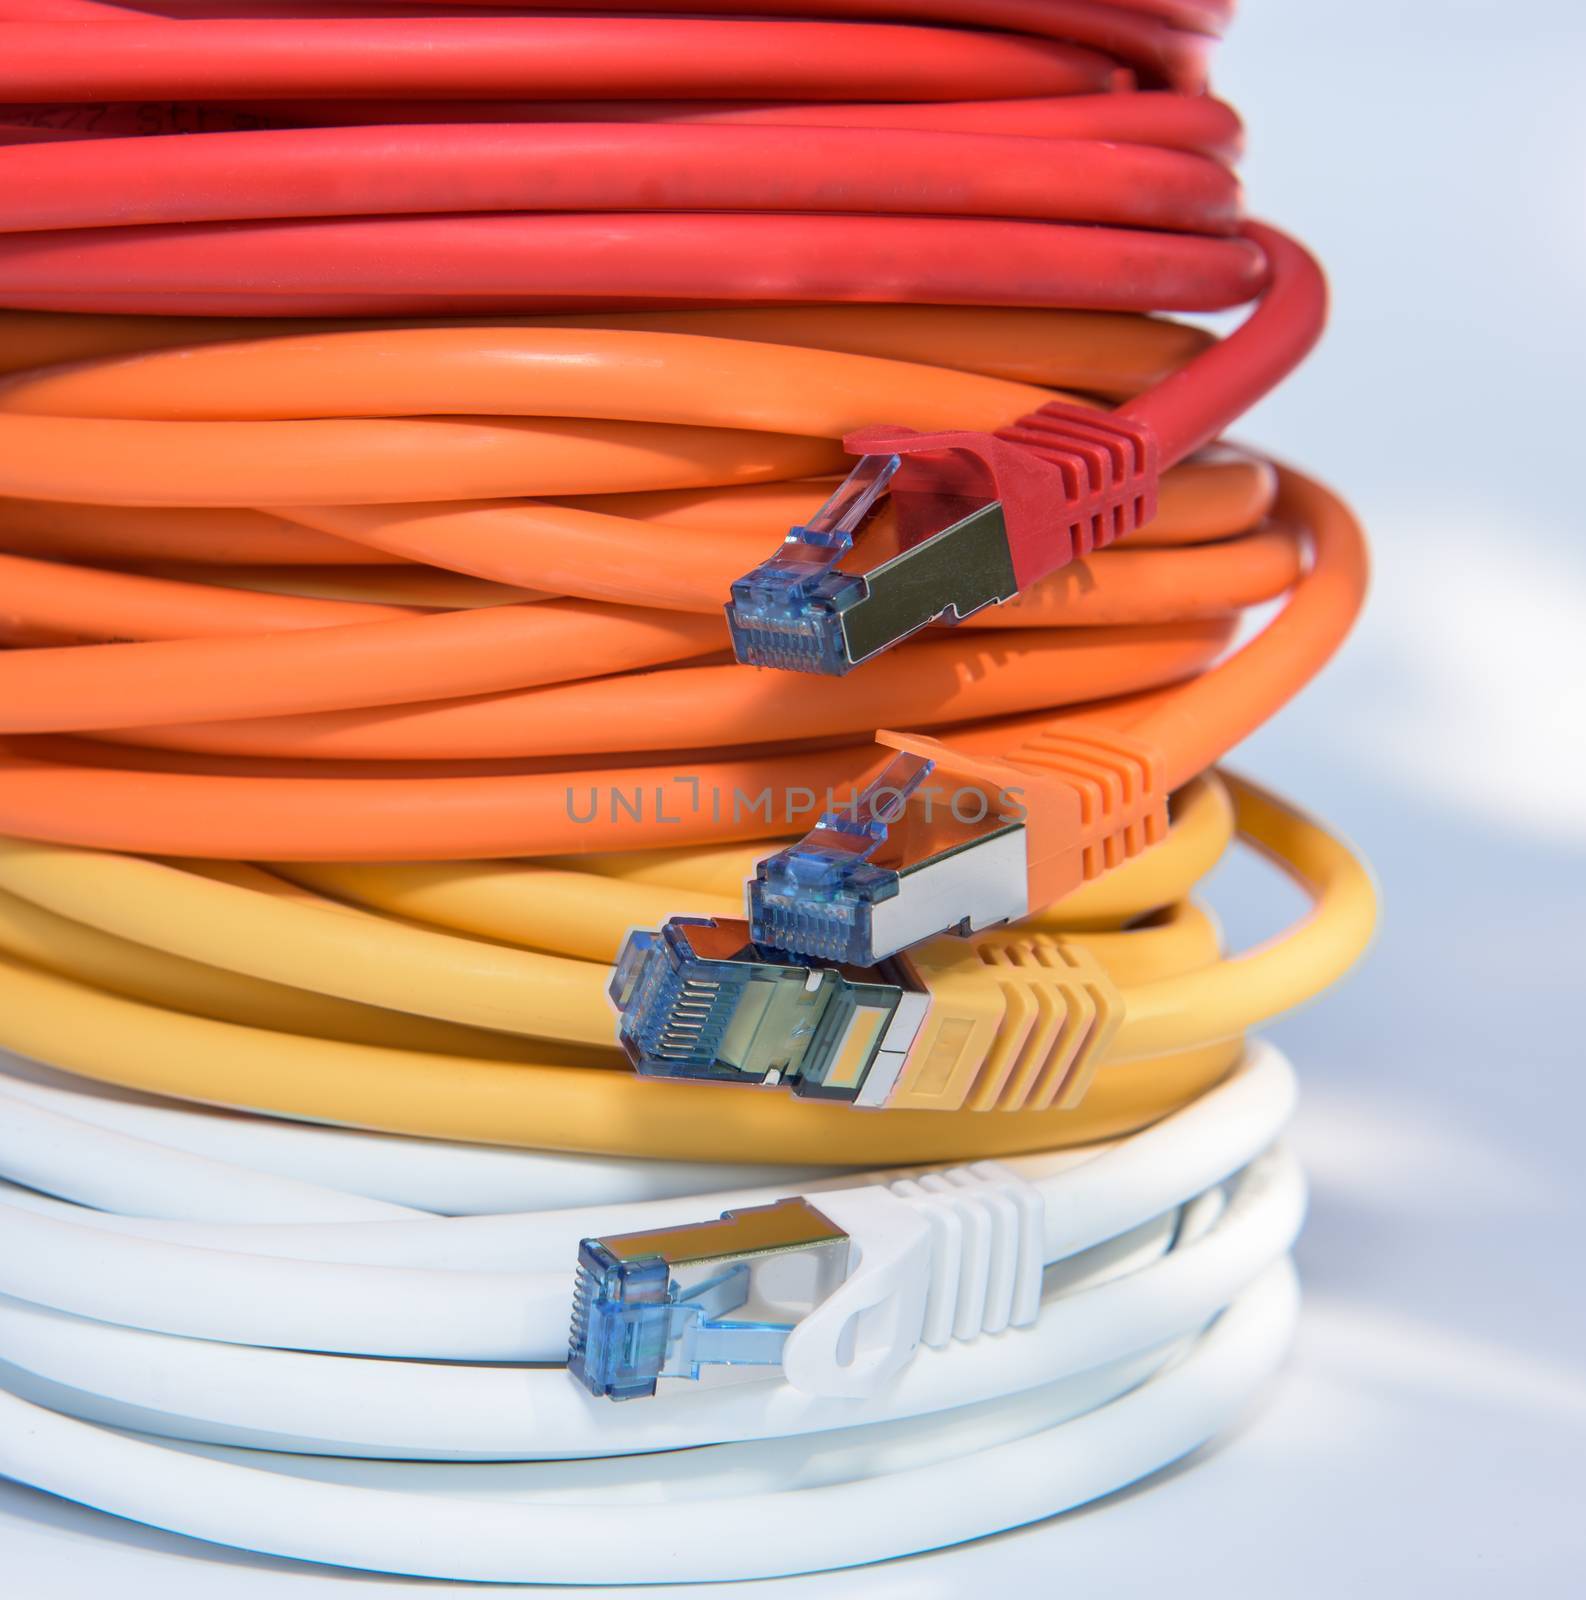 Colorful network cables